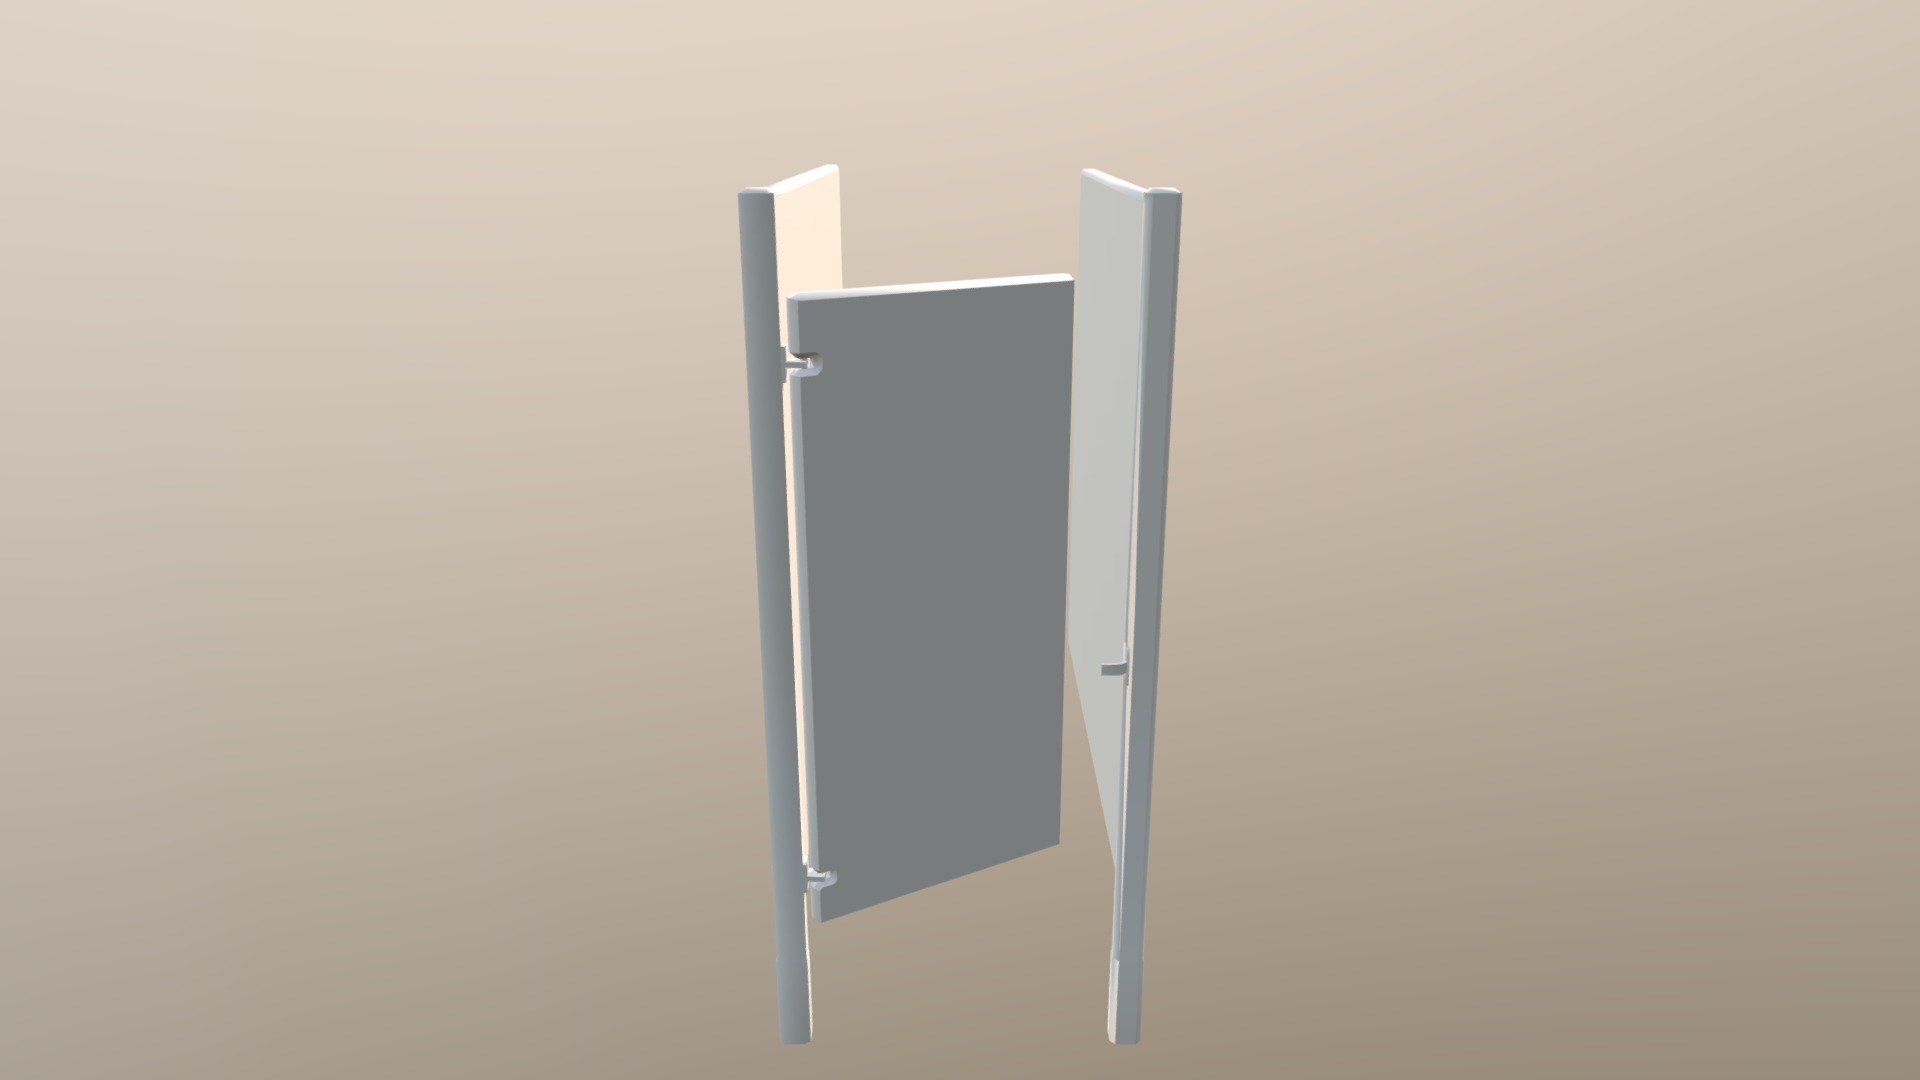 This is a non animated toilet cubicle/stall/divder which will look great in any gaming project but it will require textures of your own choice but the door will need animating.

This is free to download 3d model